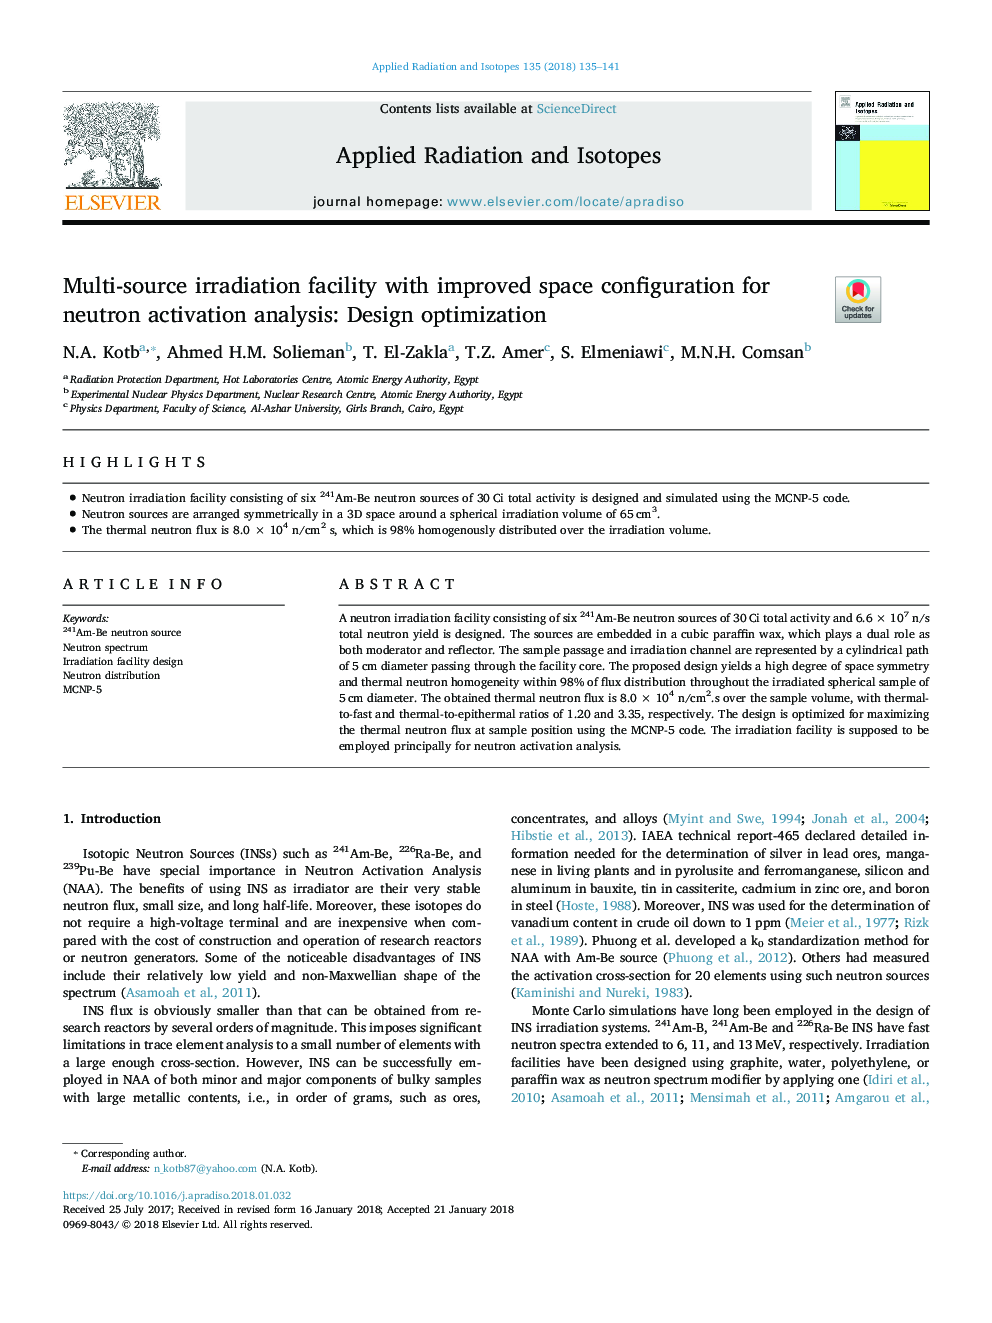 Multi-source irradiation facility with improved space configuration for neutron activation analysis: Design optimization